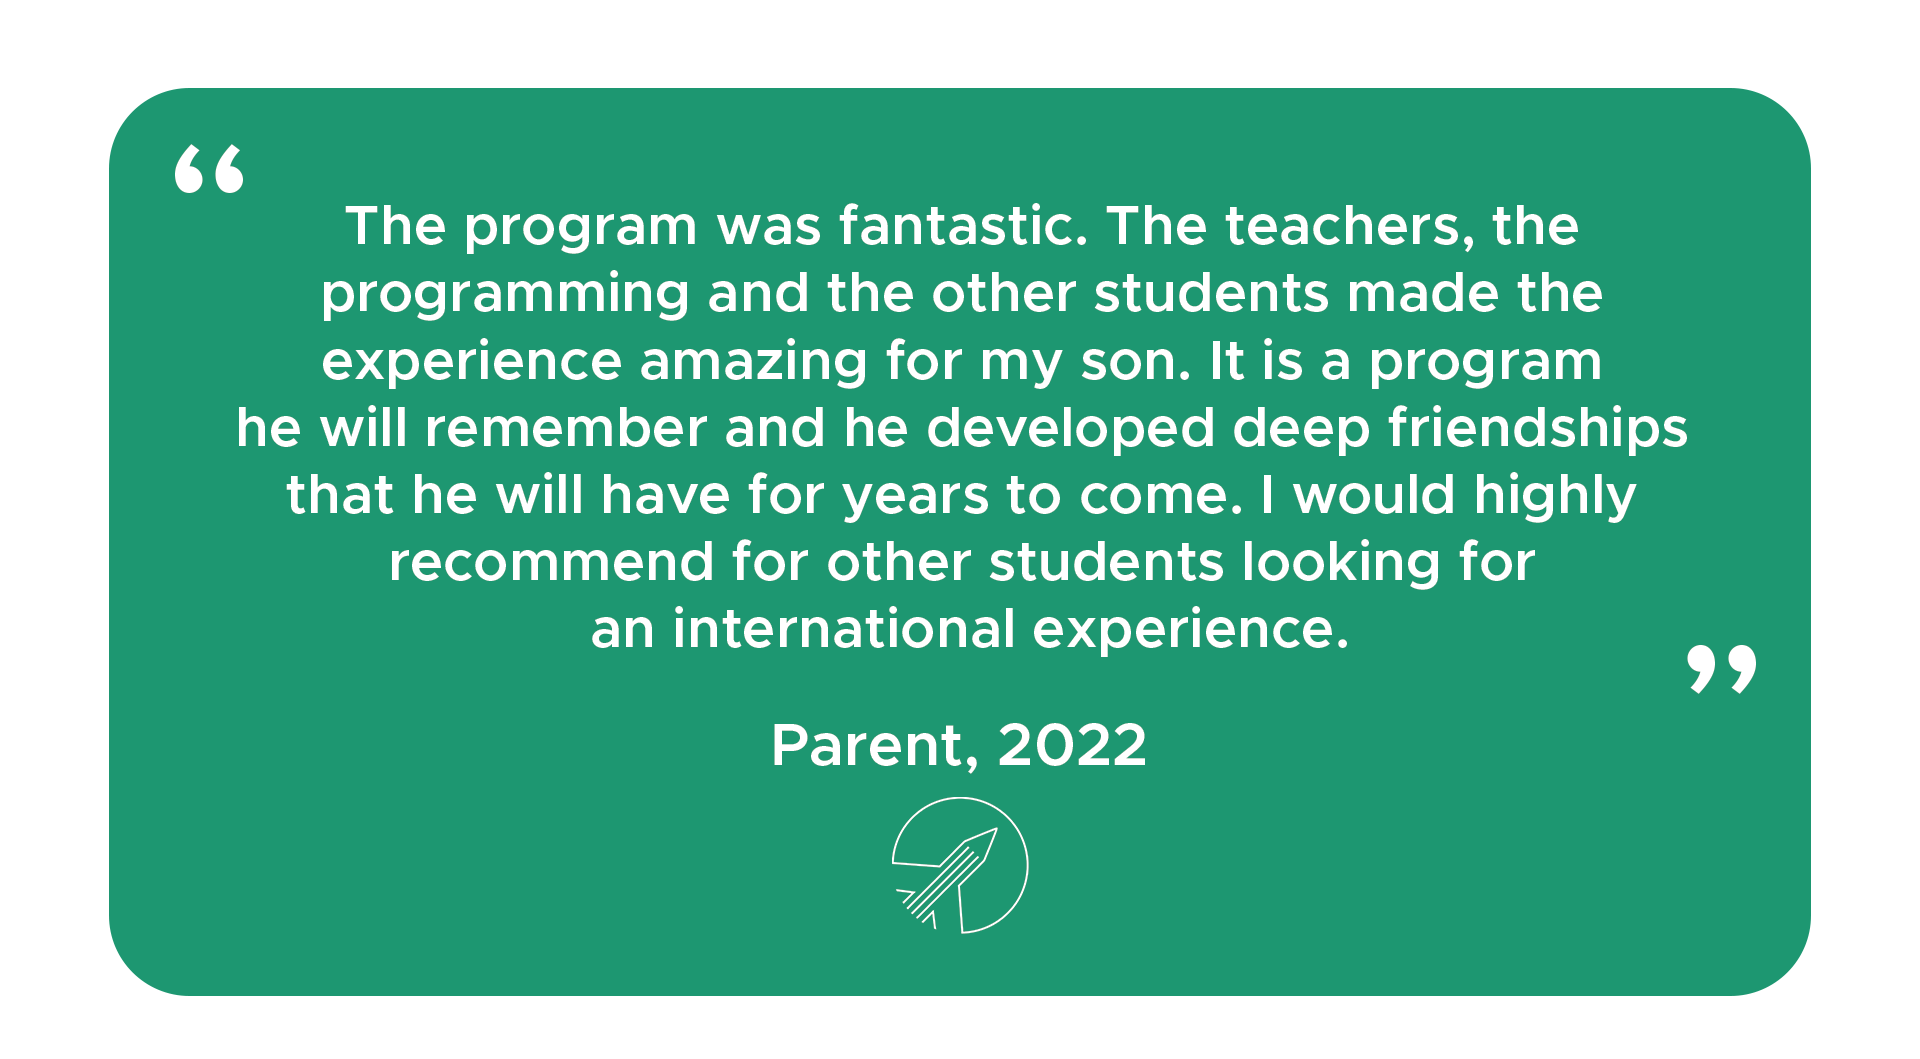 "The program was fantastic. The teachers, the programming and the other students made the experience amazing for my son. It is a program he will remember and he developed deep friendships that he will have for years to come. I would highly recommend for other students looking for an international experience." - Parent, 2022